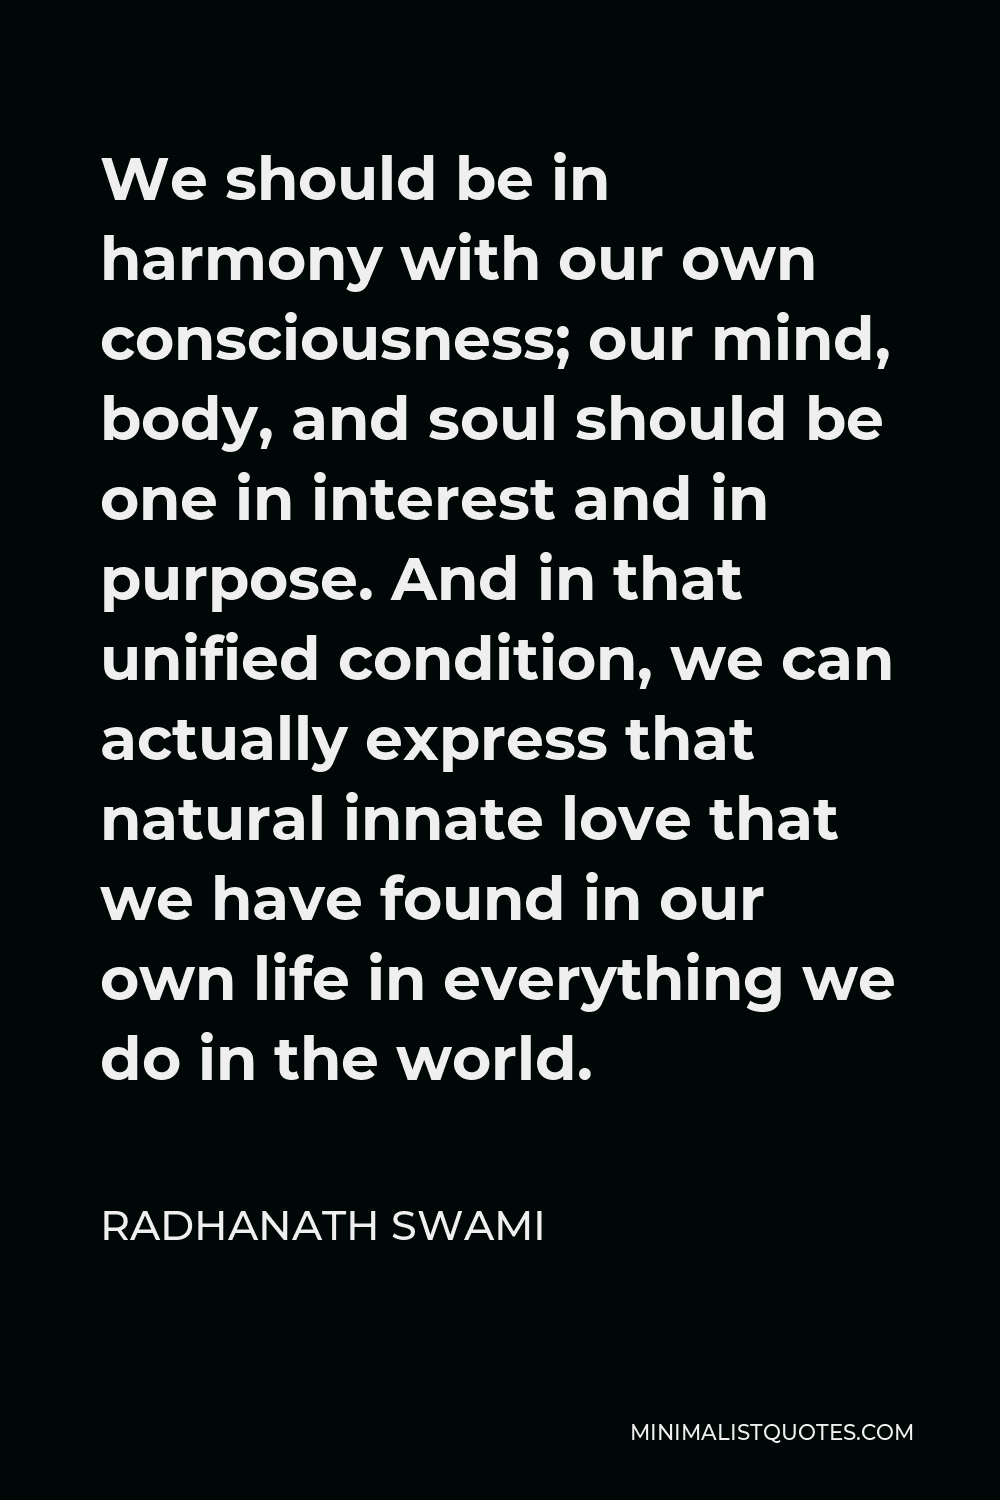 Radhanath Swami Quote - We should be in harmony with our own consciousness; our mind, body, and soul should be one in interest and in purpose. And in that unified condition, we can actually express that natural innate love that we have found in our own life in everything we do in the world.